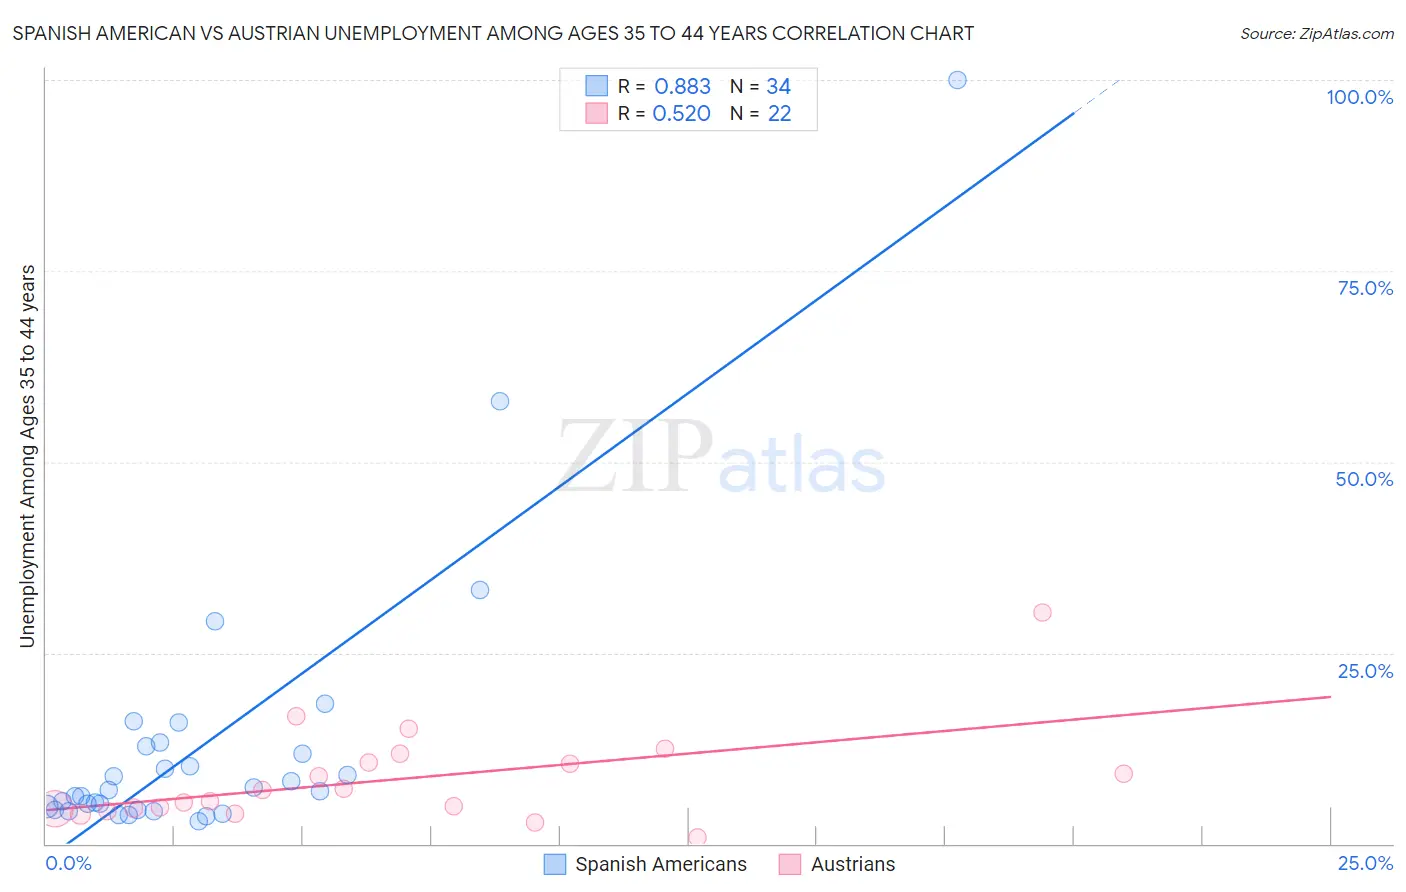 Spanish American vs Austrian Unemployment Among Ages 35 to 44 years